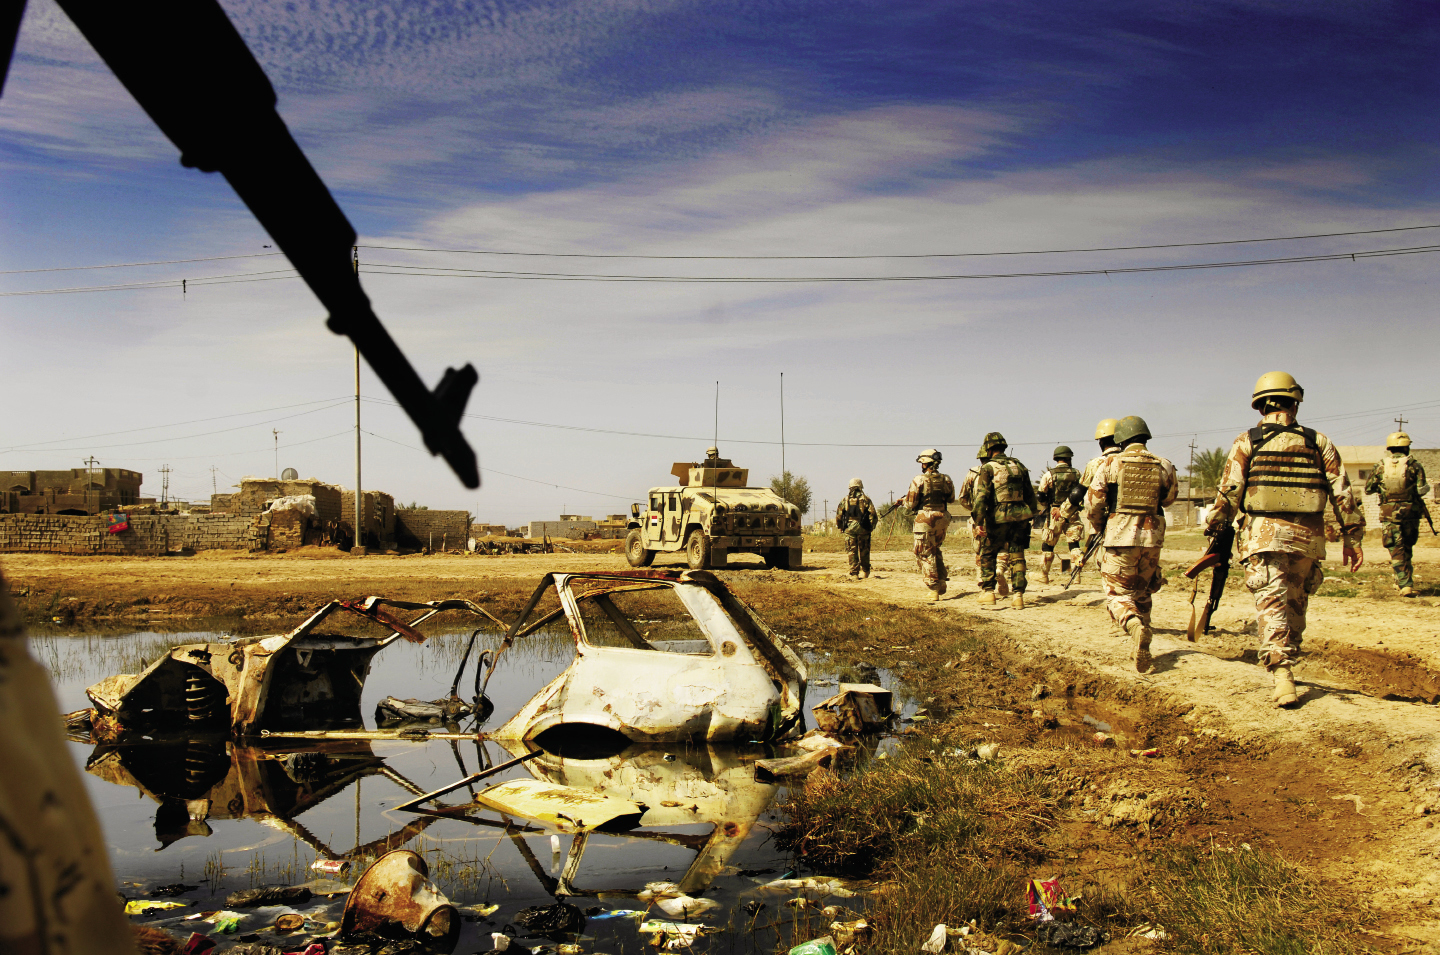 March 4, 2007: Iraqi Army soldiers march past a car destroyed during a prior operation in New Baqubah, Iraq. The operation aimed to eliminate the area as a base for anti-Iraqi forces building I.E.D.s (improvised explosive devices).